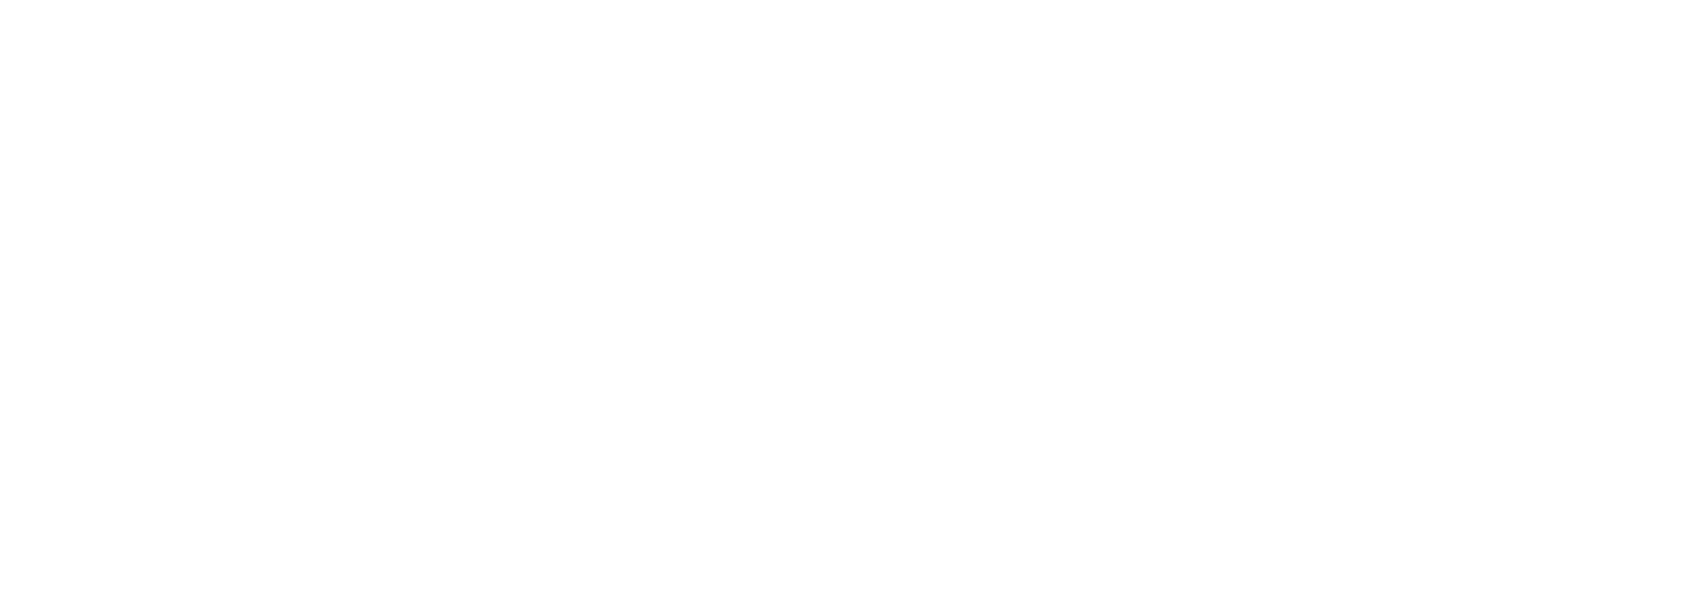 Join FWE at the 2022 NRA Show in Chicago, IL! We'll be at booth # 4245. See you May 21 - 24 at McCormick Place!